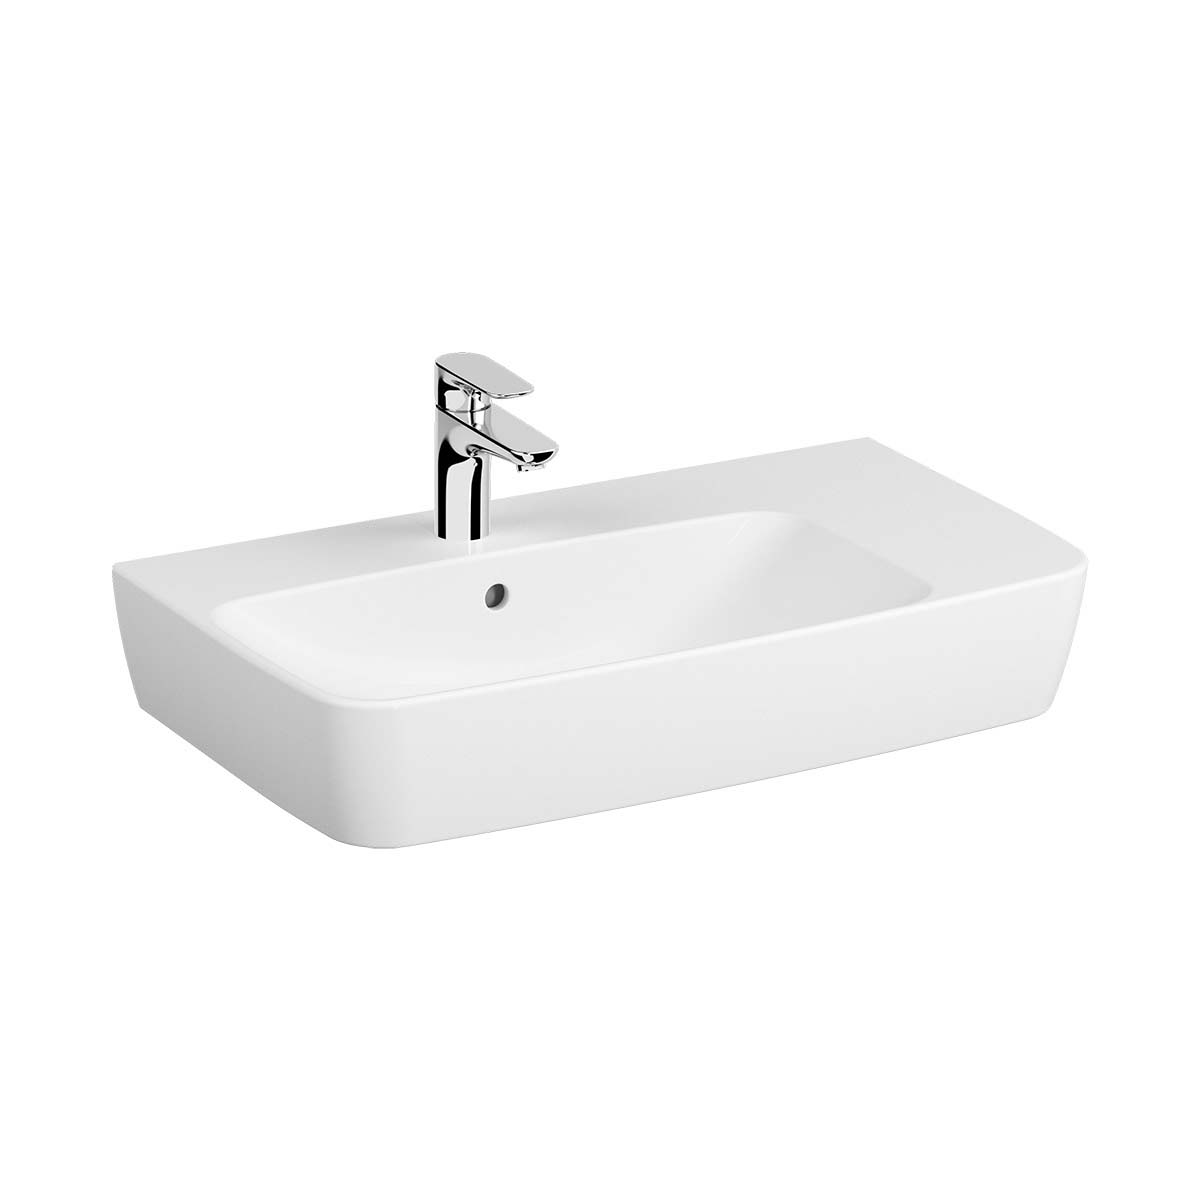 Assymetrical Basin, 75X45 cm, One Tap Hole, With Overflow Hole